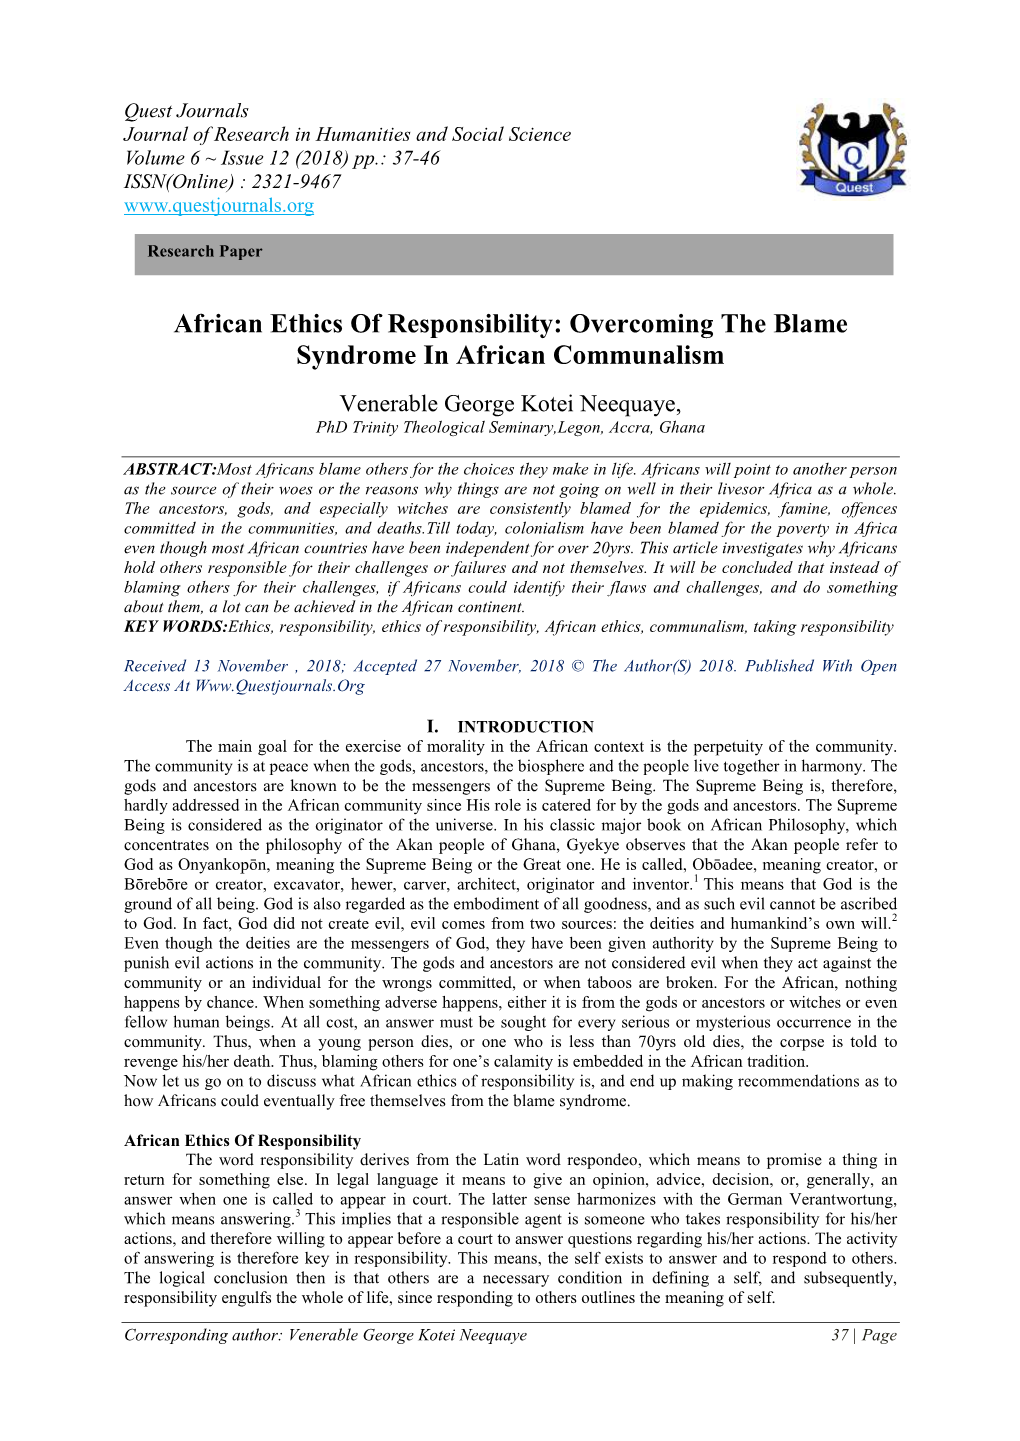 African Ethics of Responsibility: Overcoming the Blame Syndrome in African Communalism